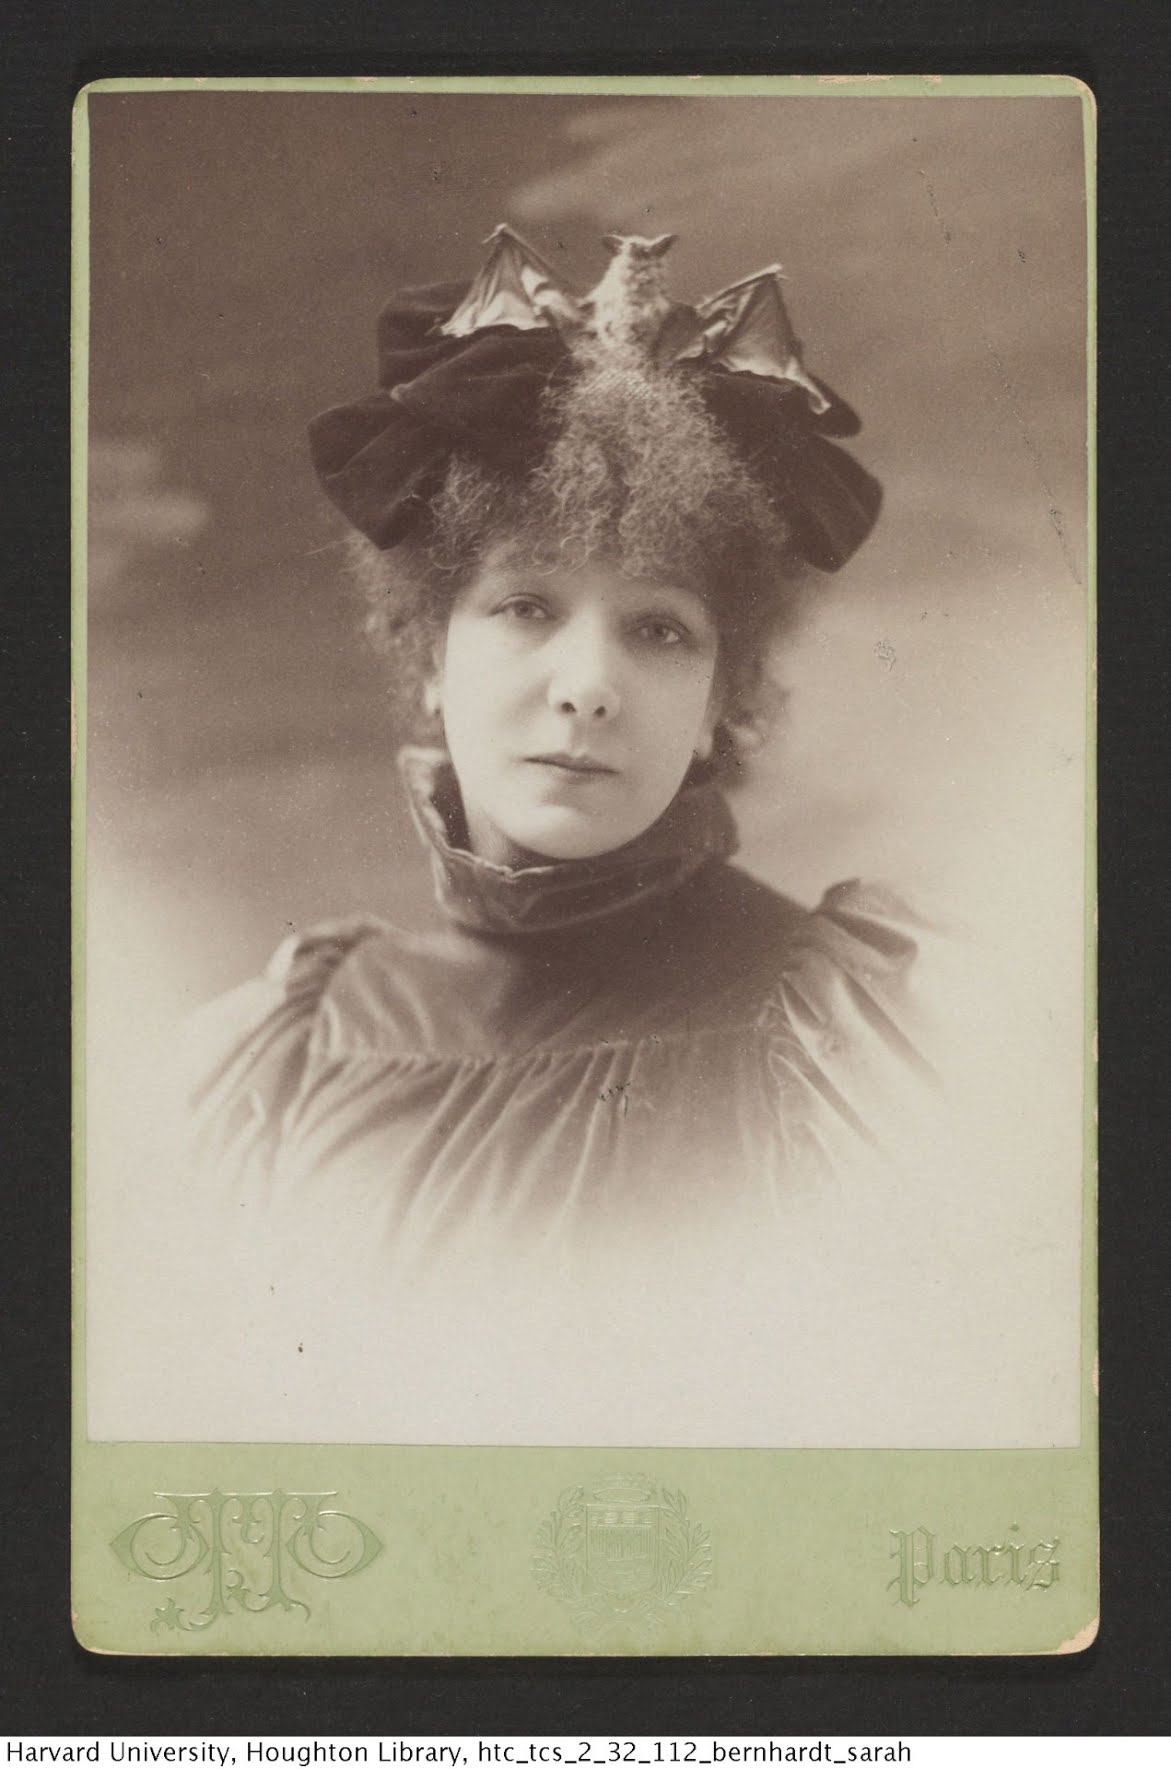 Actress Sarah Bernhardt wears a hat with a taxidermied bat standing in the center of it.